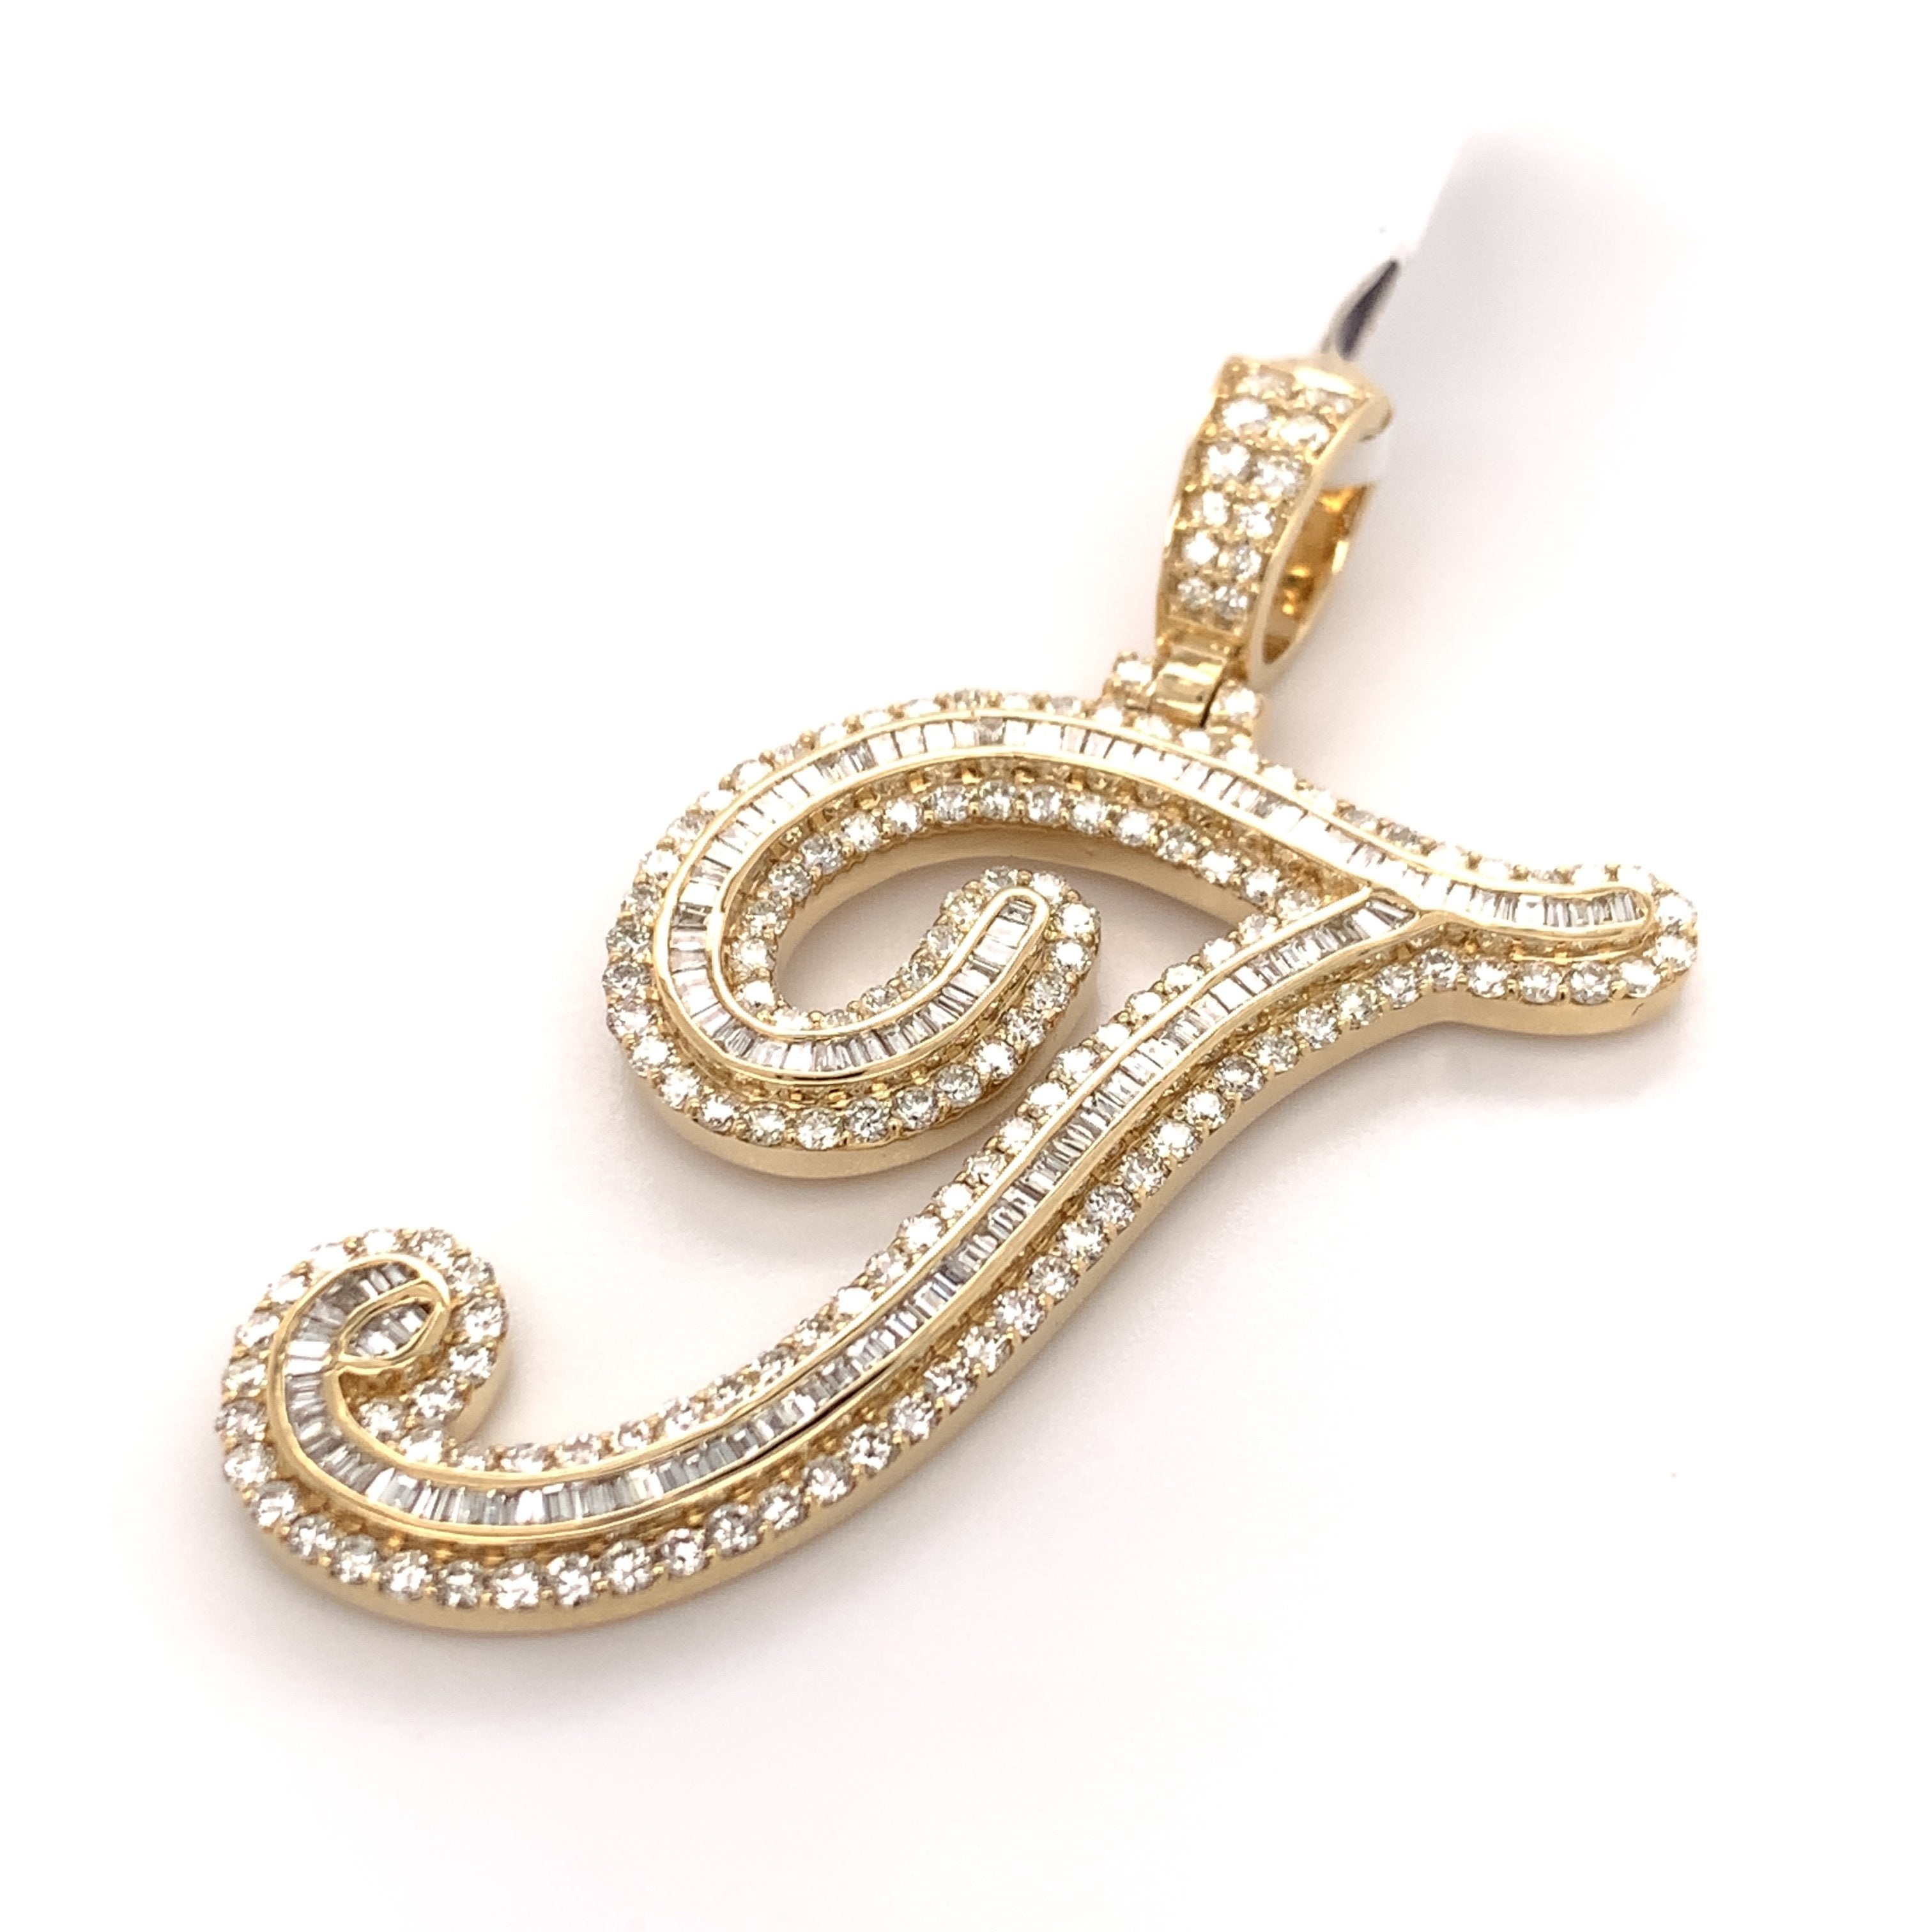 3.25 CT. Diamond Baguette Initial "T" Pendant in 10KT Gold - White Carat - USA & Canada